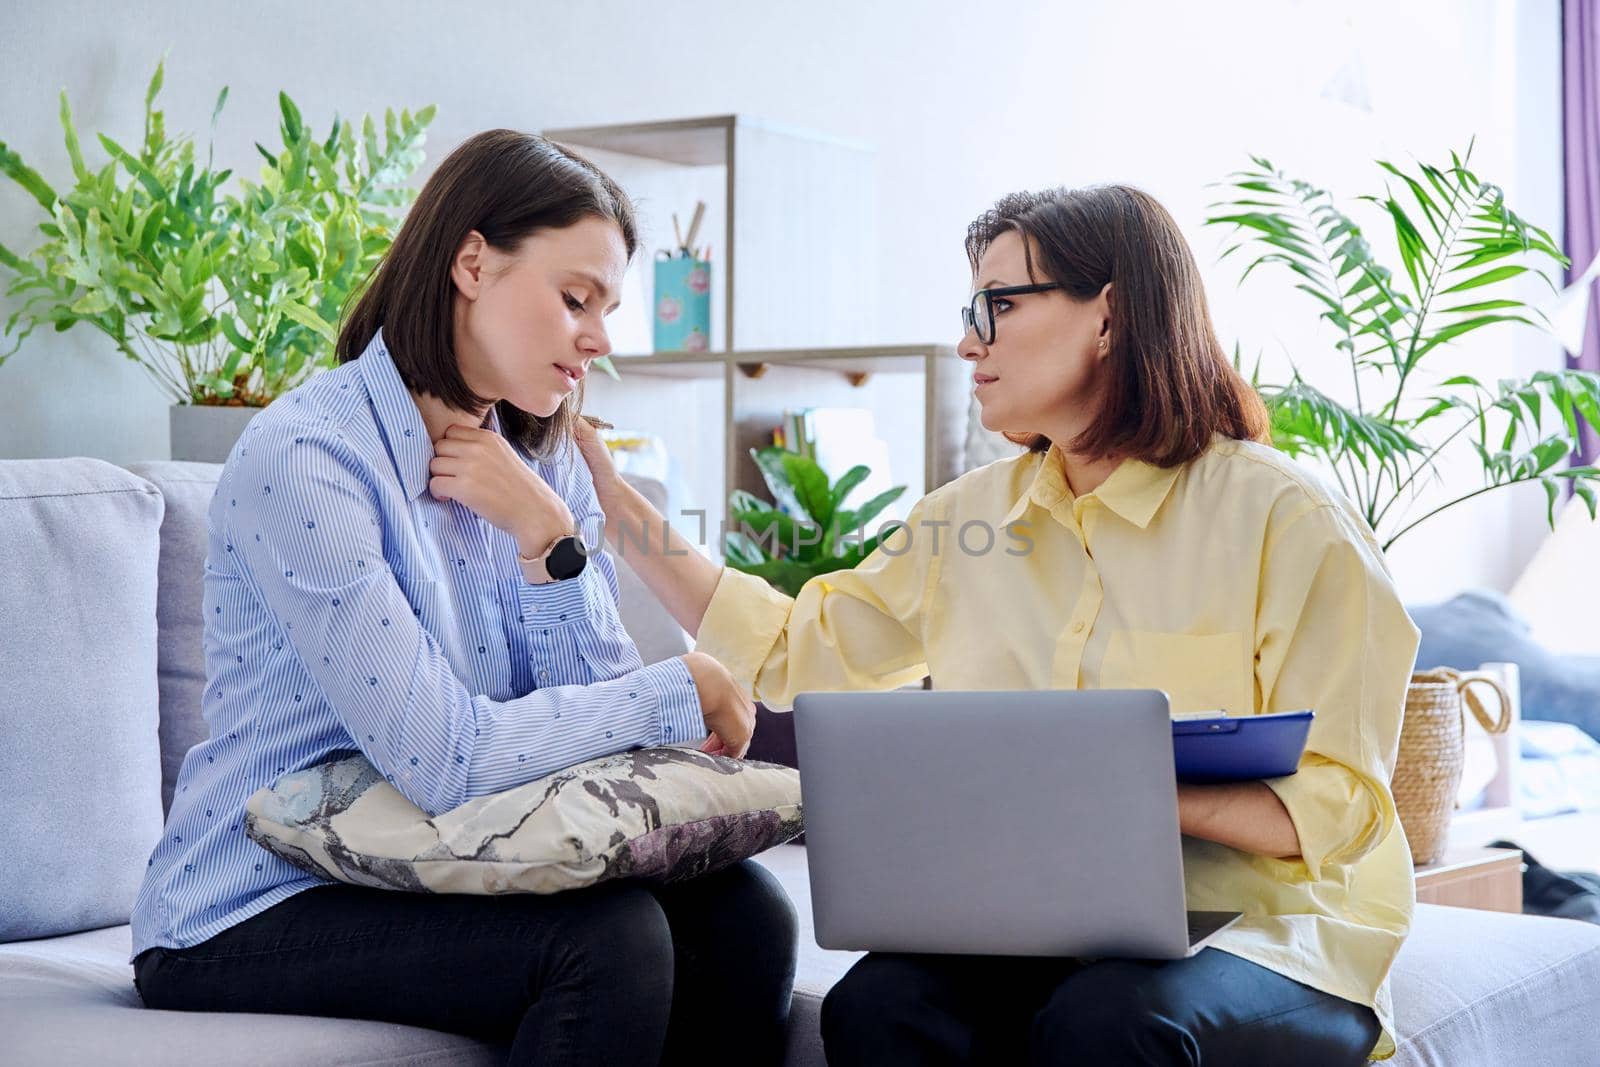 Upset sad young woman at session with psychologist. Mature female psychologist counseling helping patient, women sitting on couch in office. Psychology, psychiatry, treatment, mental health concept